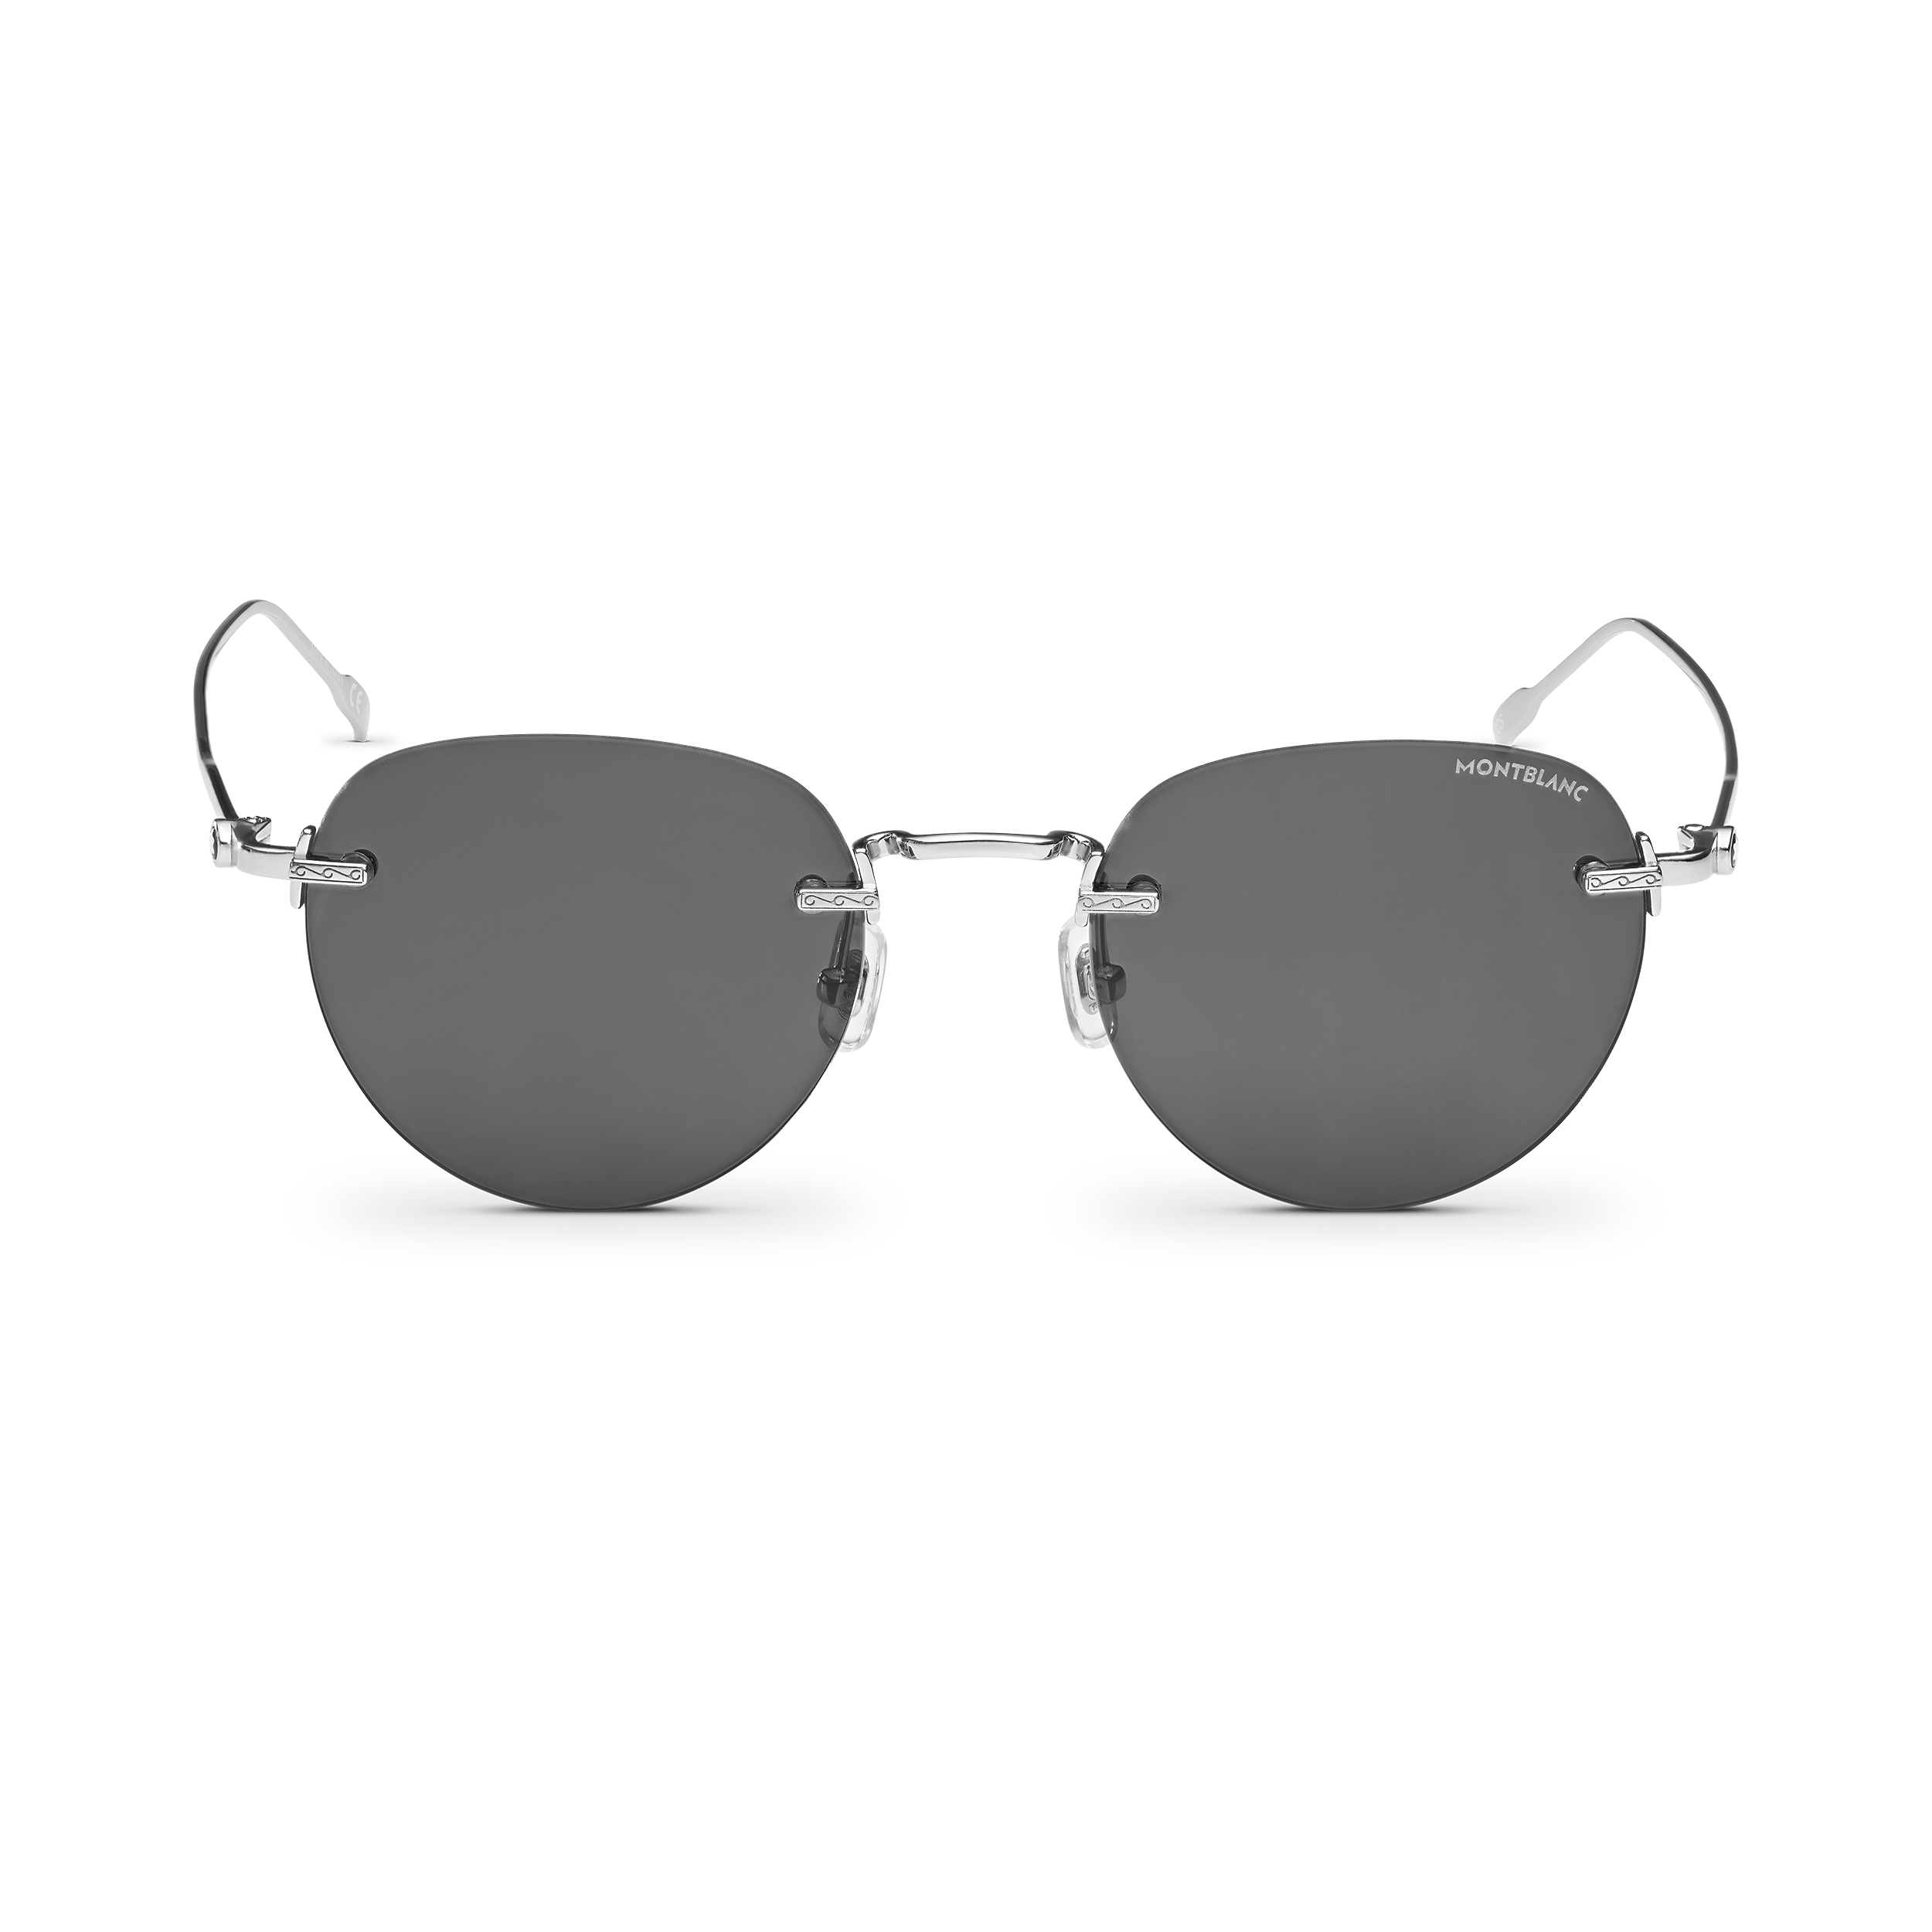 Round Sunglasses with Silver Colored Metal Frame, image 1